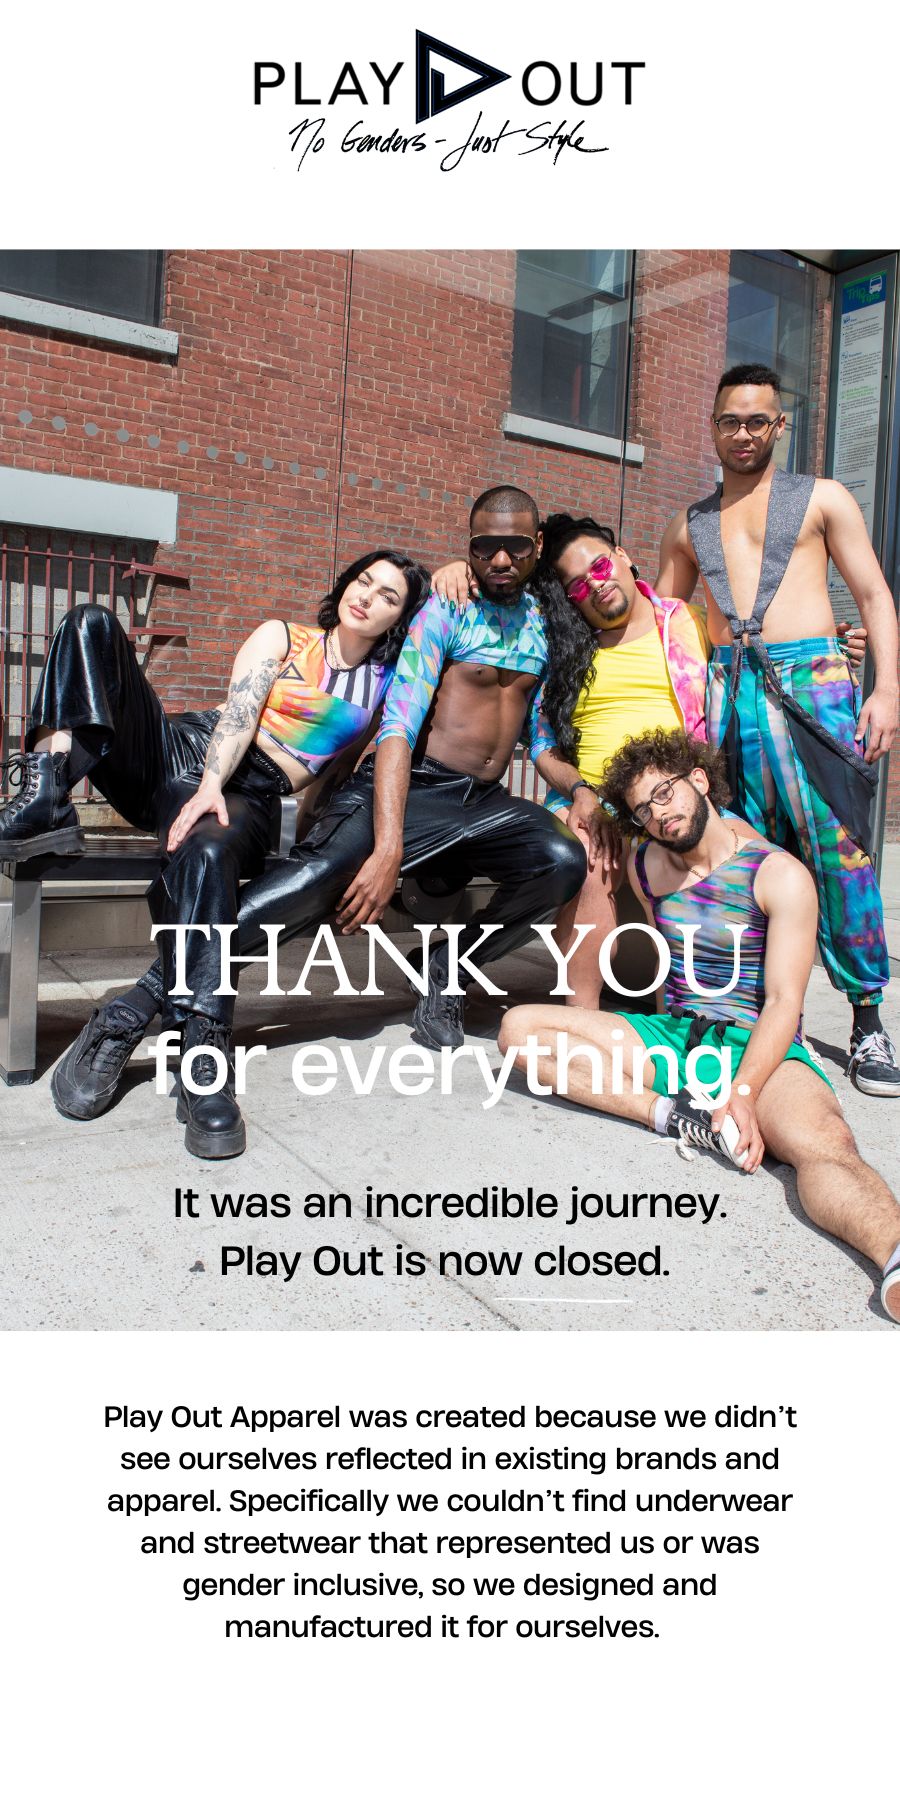 Thank you for everything. Play Out Apparel was created because we didn't see ourselves reflected in existing brands and apparel. Specifically, we couldn't find underwear and streetwear that represented us or was gender inclusive, so we designed and manufactured it ourselves. It was an incredible journey. Play Out is now closed. 